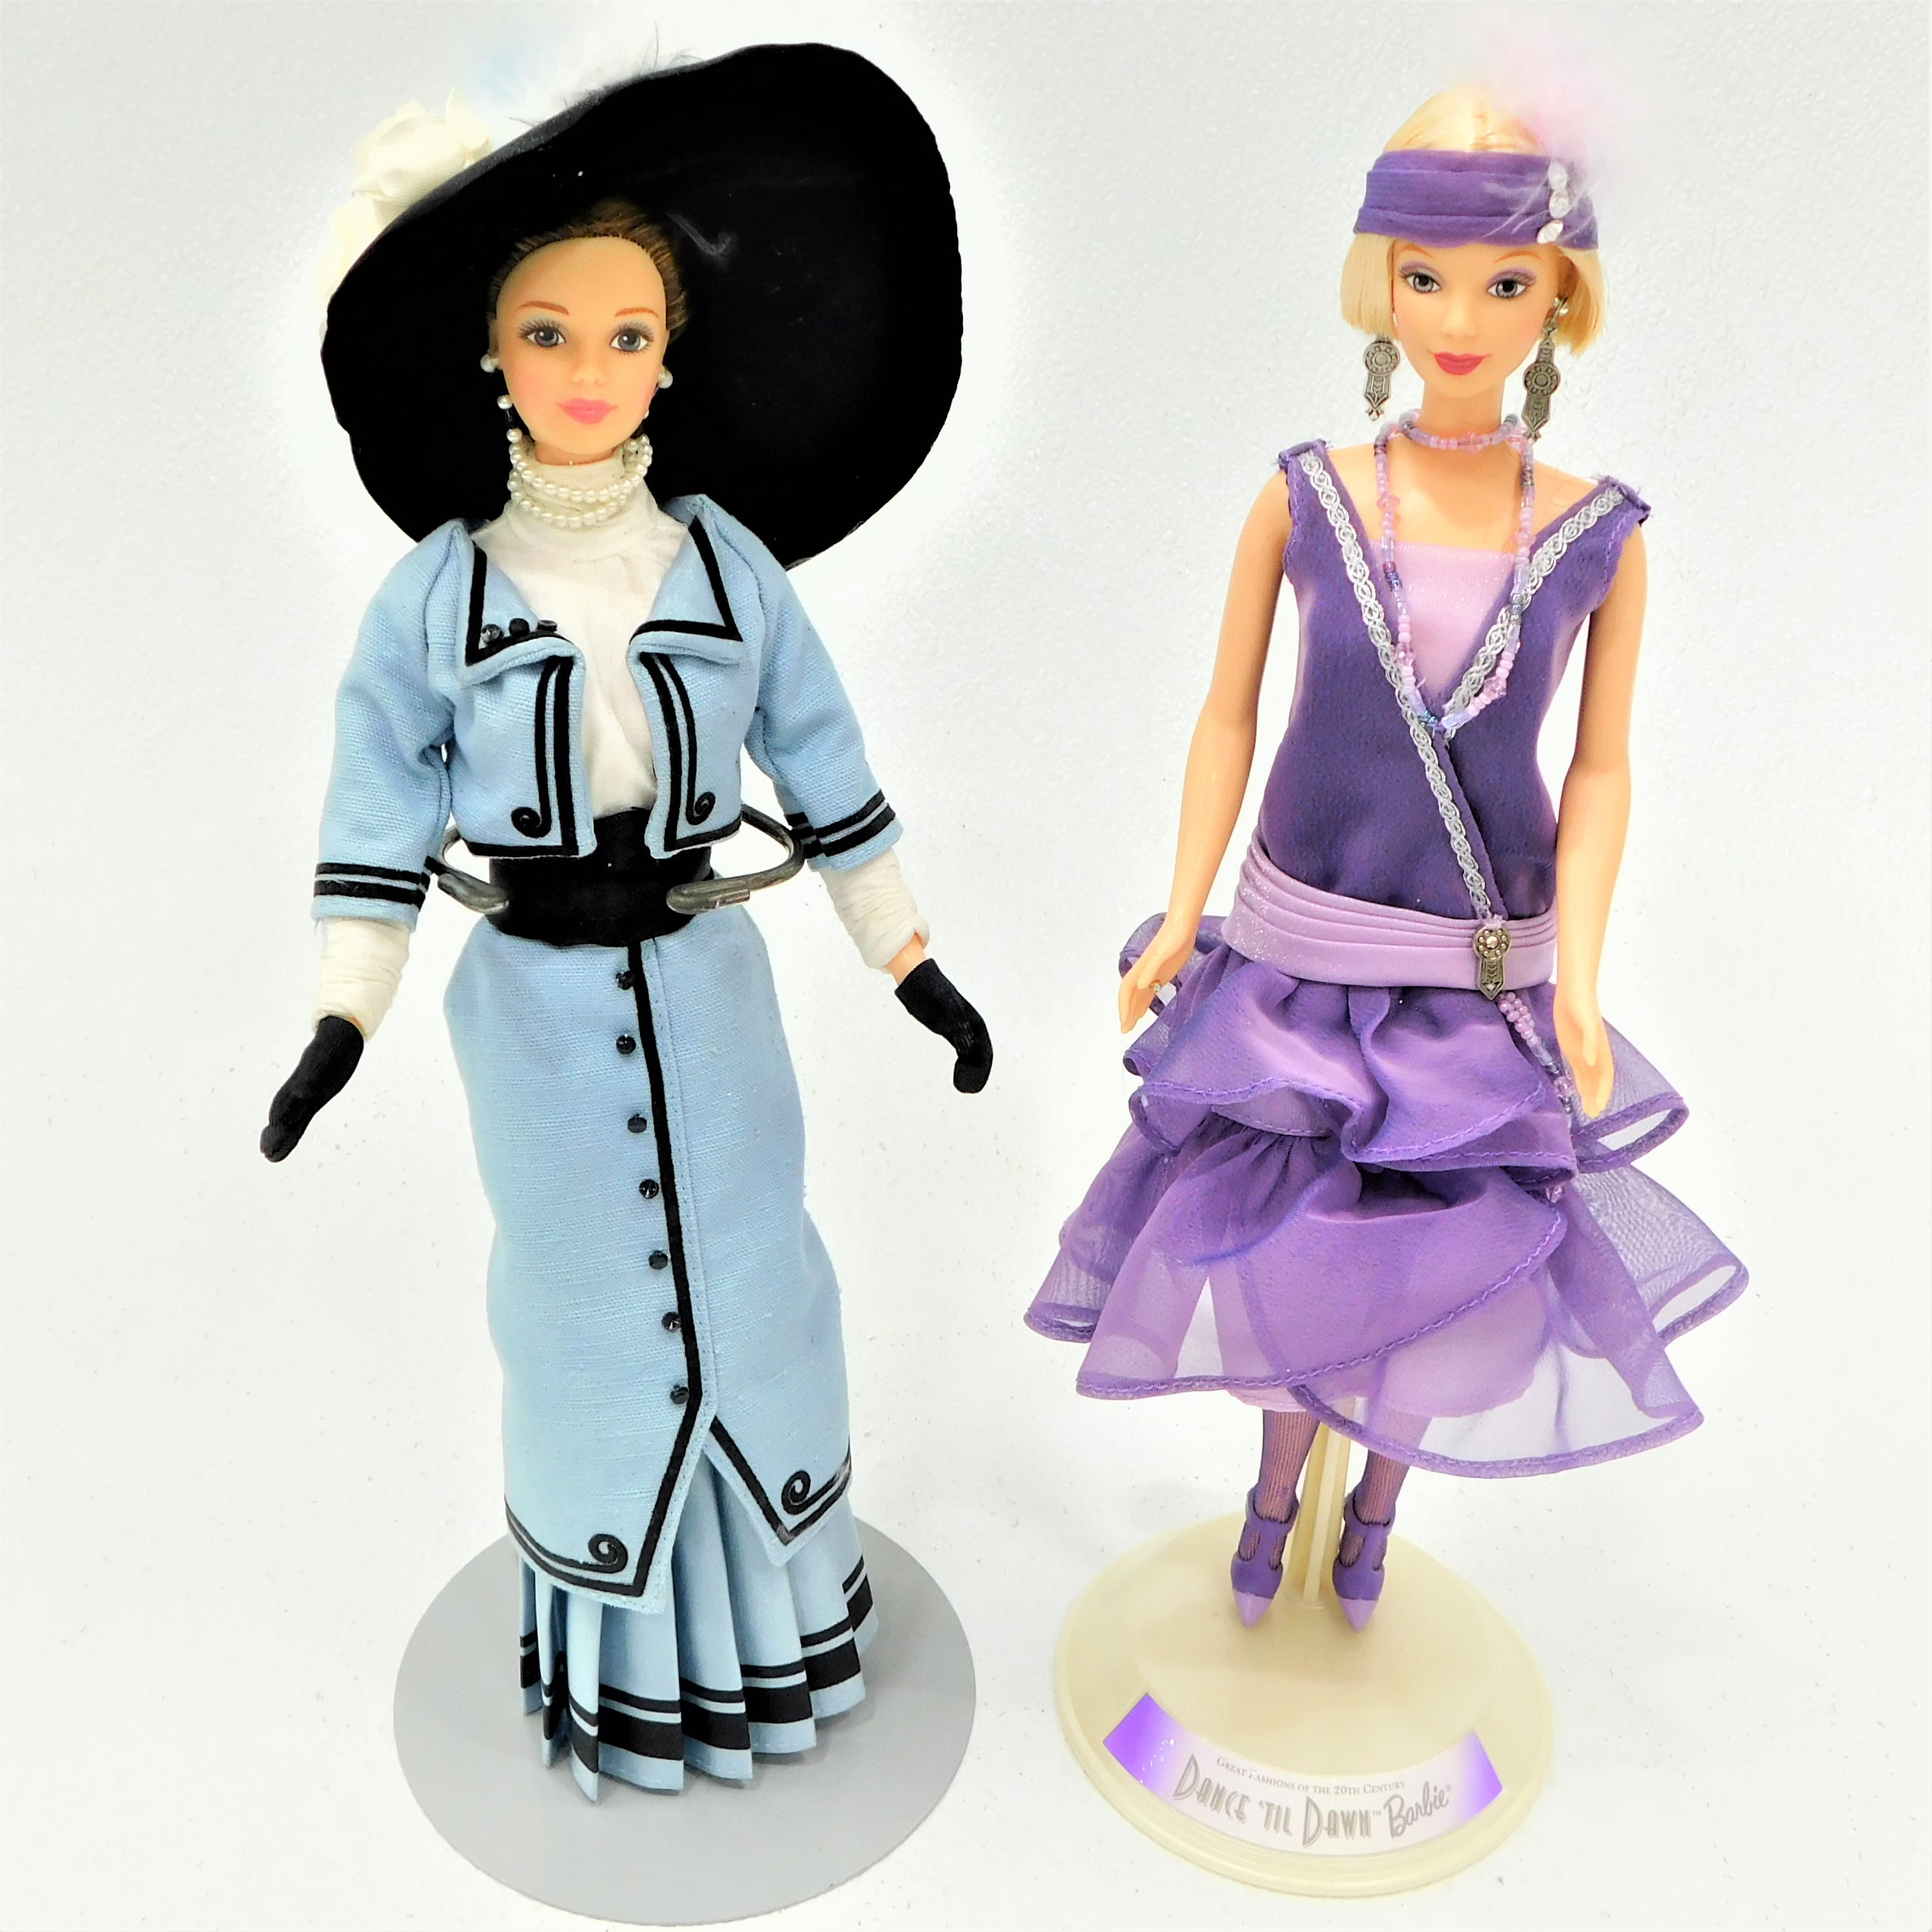 Buy the Mattel Great Fashions of the 20th Century Barbie Dolls